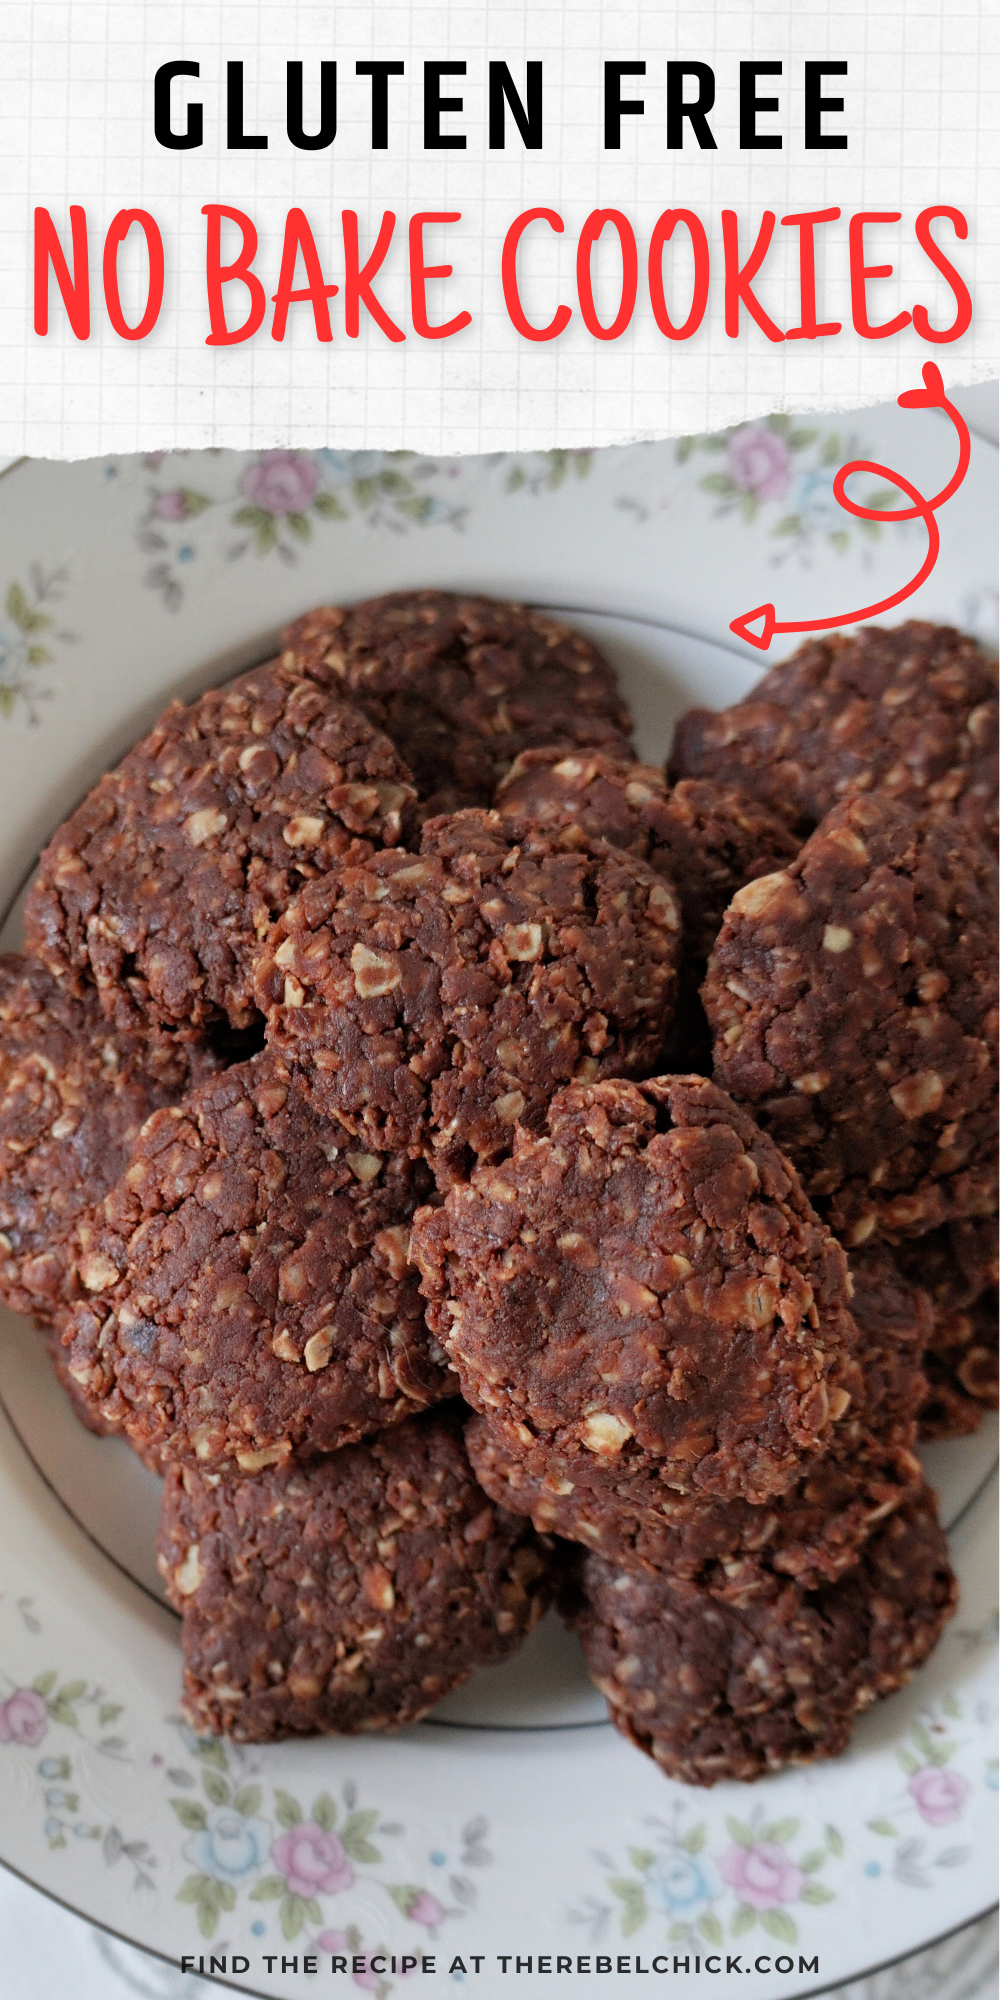 Gluten free no bake cookies filled with oatmeal, chocolate and peanut butter